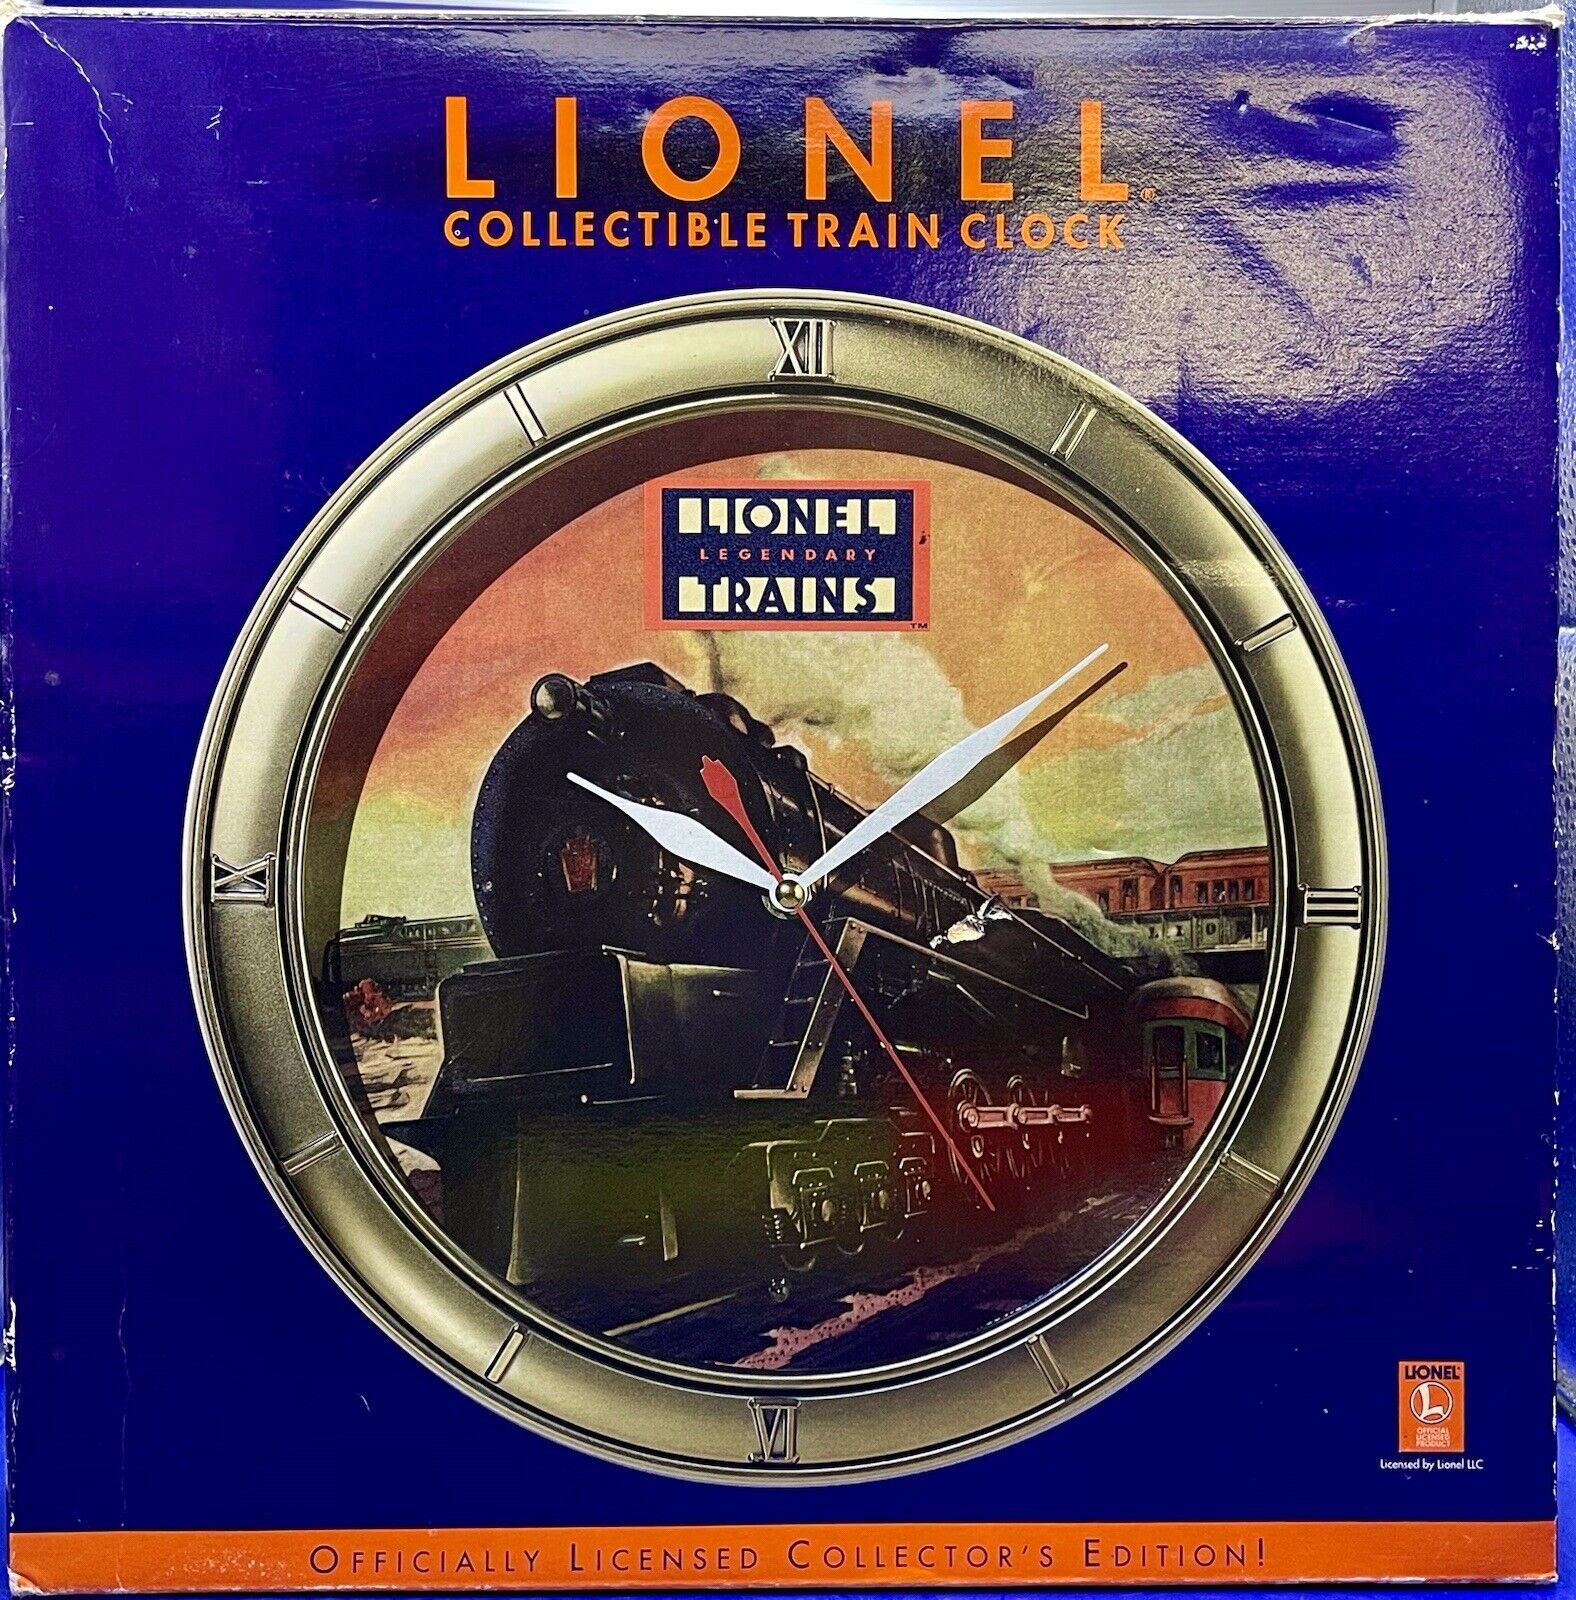 Lionel collectible train Clock Announces Hour With Train Sounds. Tested & Works